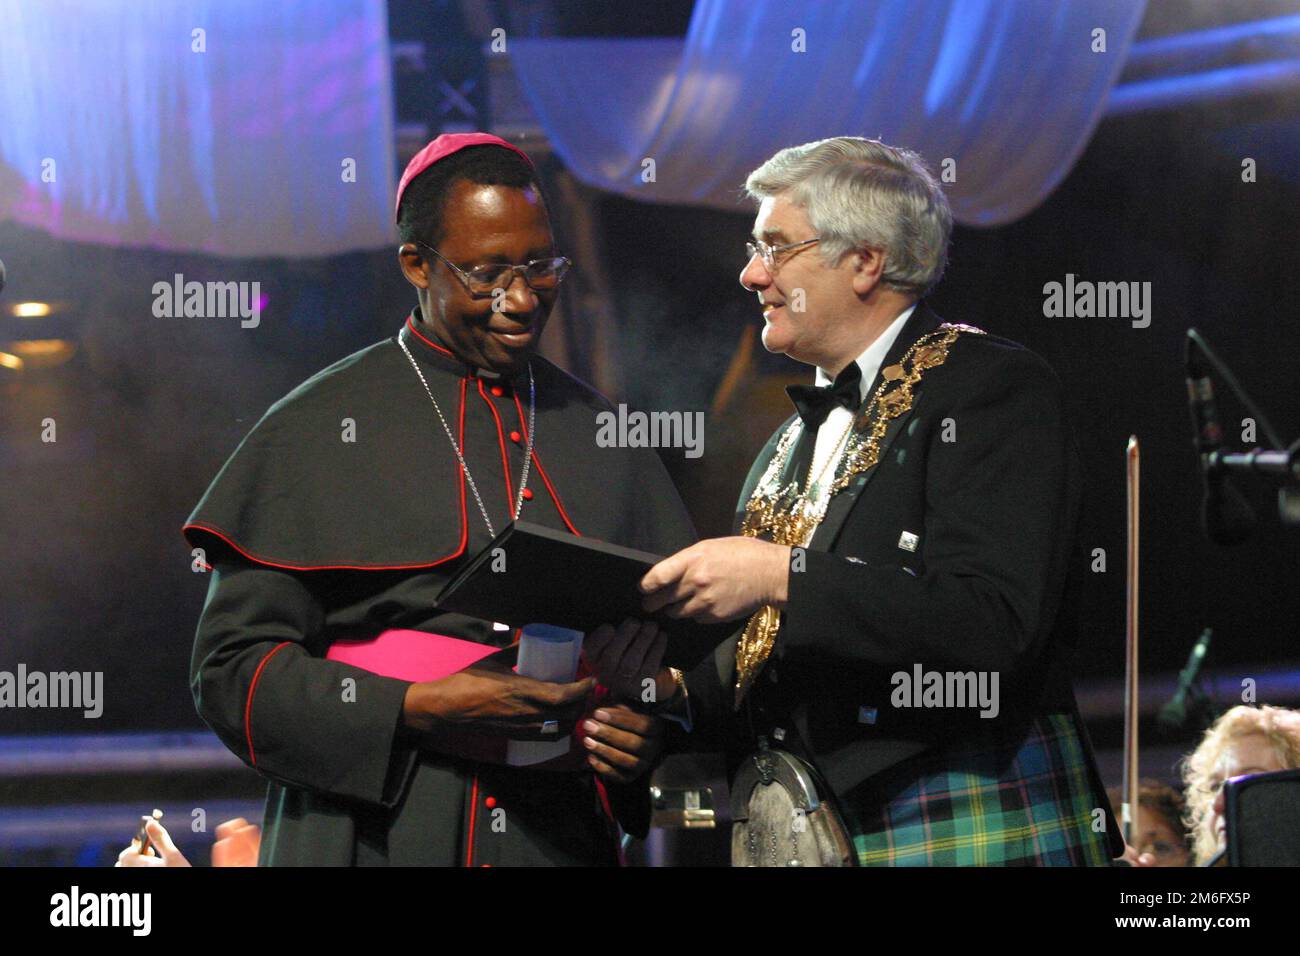 Culzean Castle, Maybole, Ayrshire , Scotland, UK, Presentation of Robert Burns Humanitarian Award at the Burns an a that festival to Pius Ncube  Roman Catholic Archbishop of Bulawayo, Zimbabwe,Widely known for his human rights advocacy, Ncube was an outspoken critic of former President Robert Mugabe. Pius Ncube resigned on 11 September 2007 after a video of him and a married woman identified as Rosemary Sibanda, went viral. Stock Photo